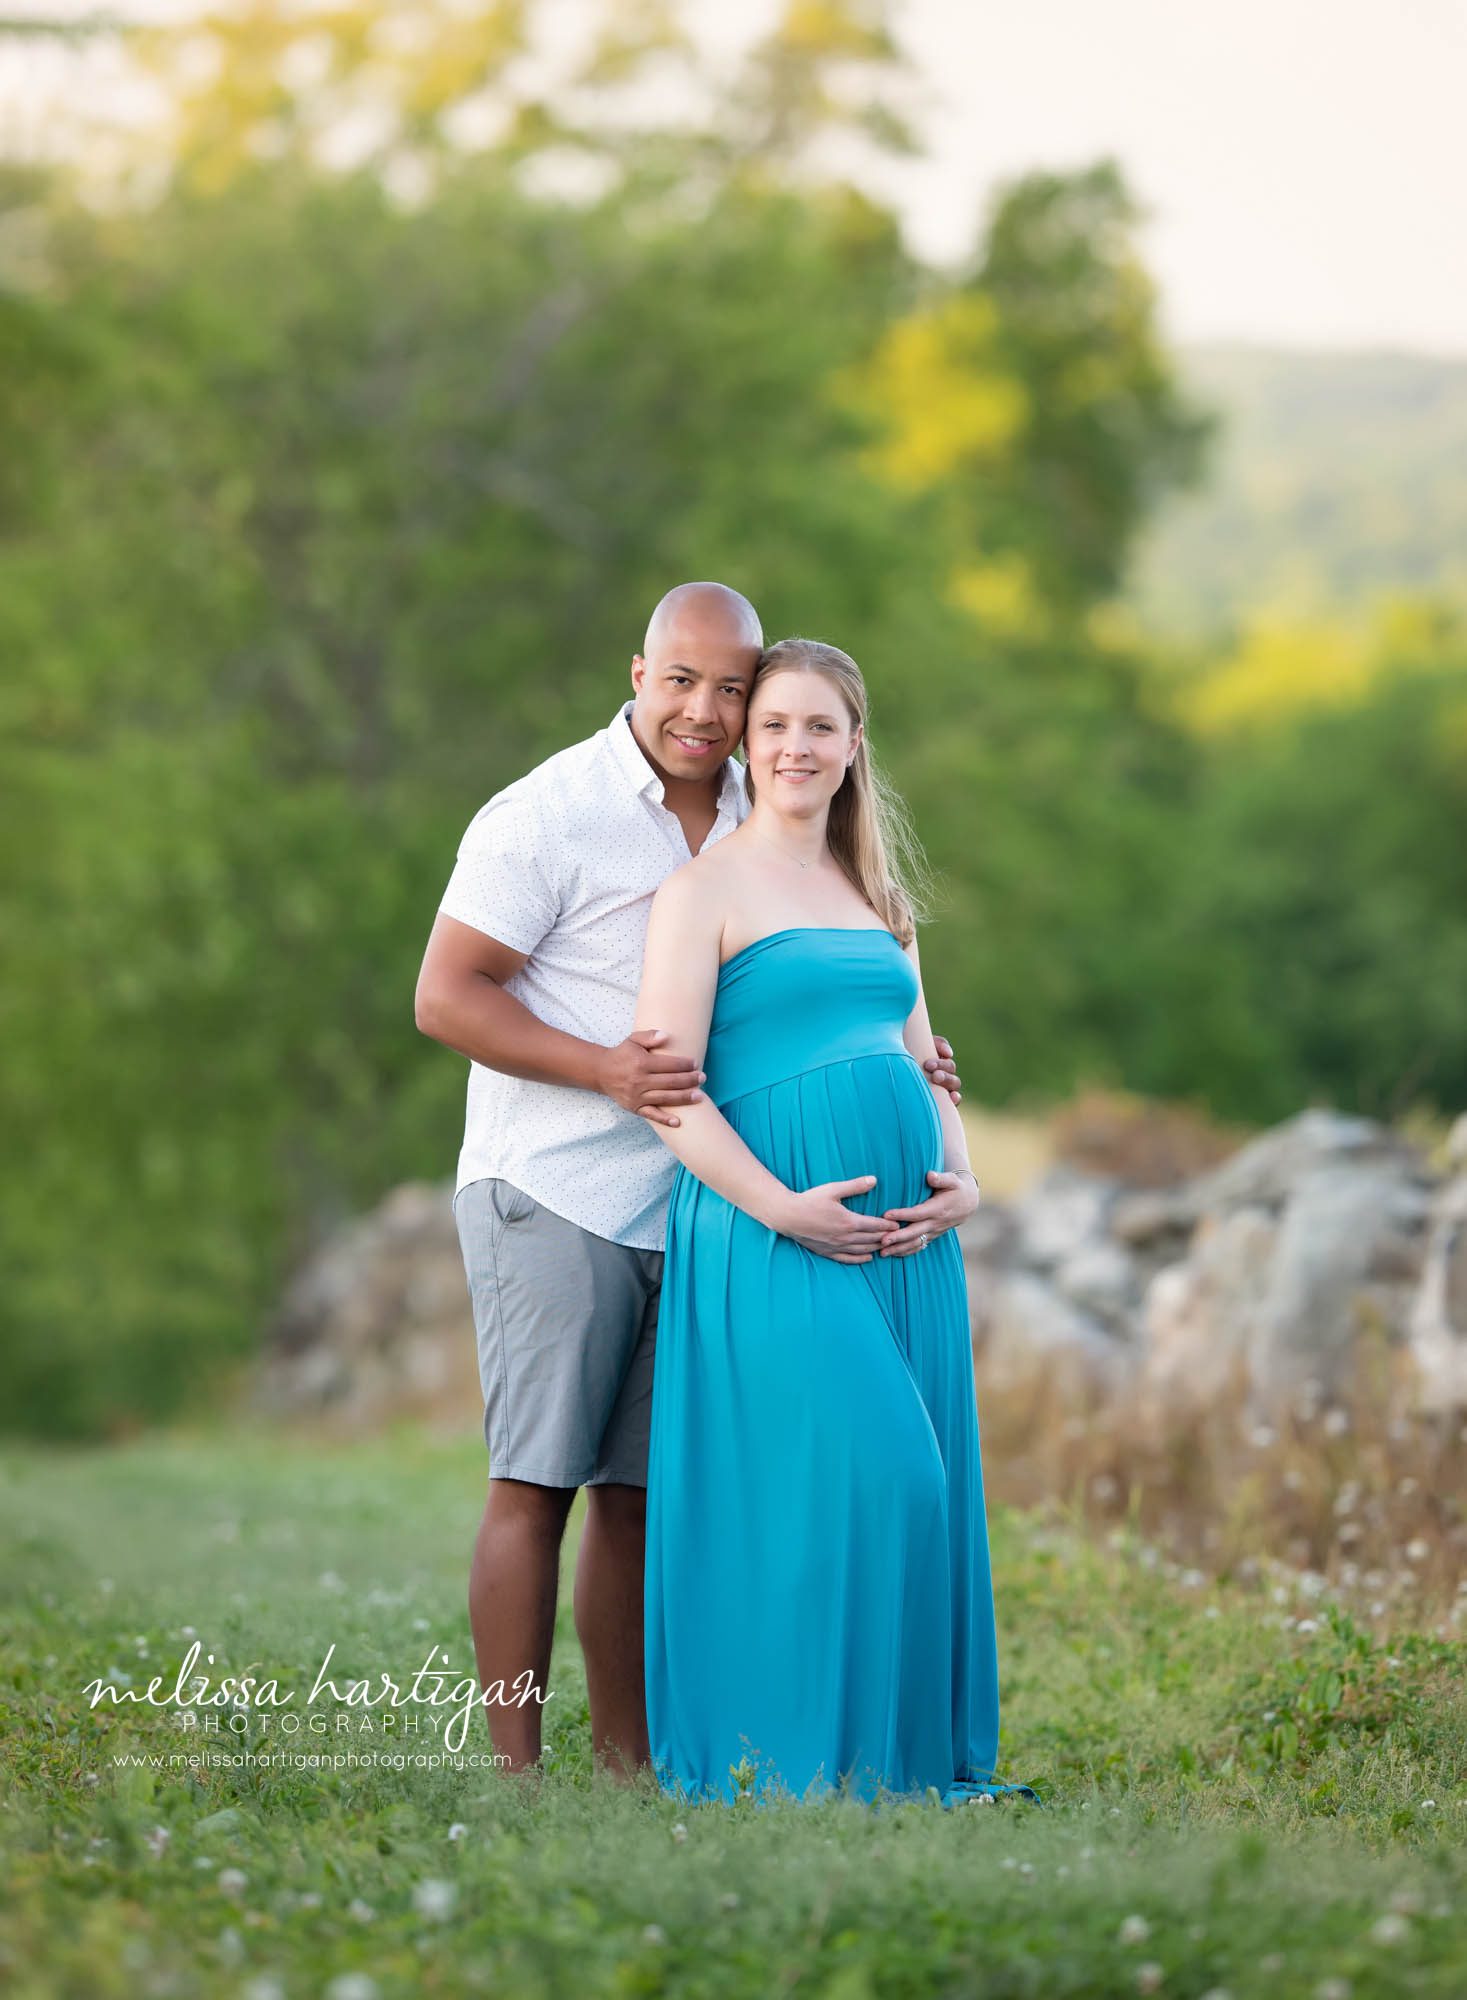 pregnant mom leaning against dad, dad-to-be holding moms arms smiling for couples picture CT maternity photography